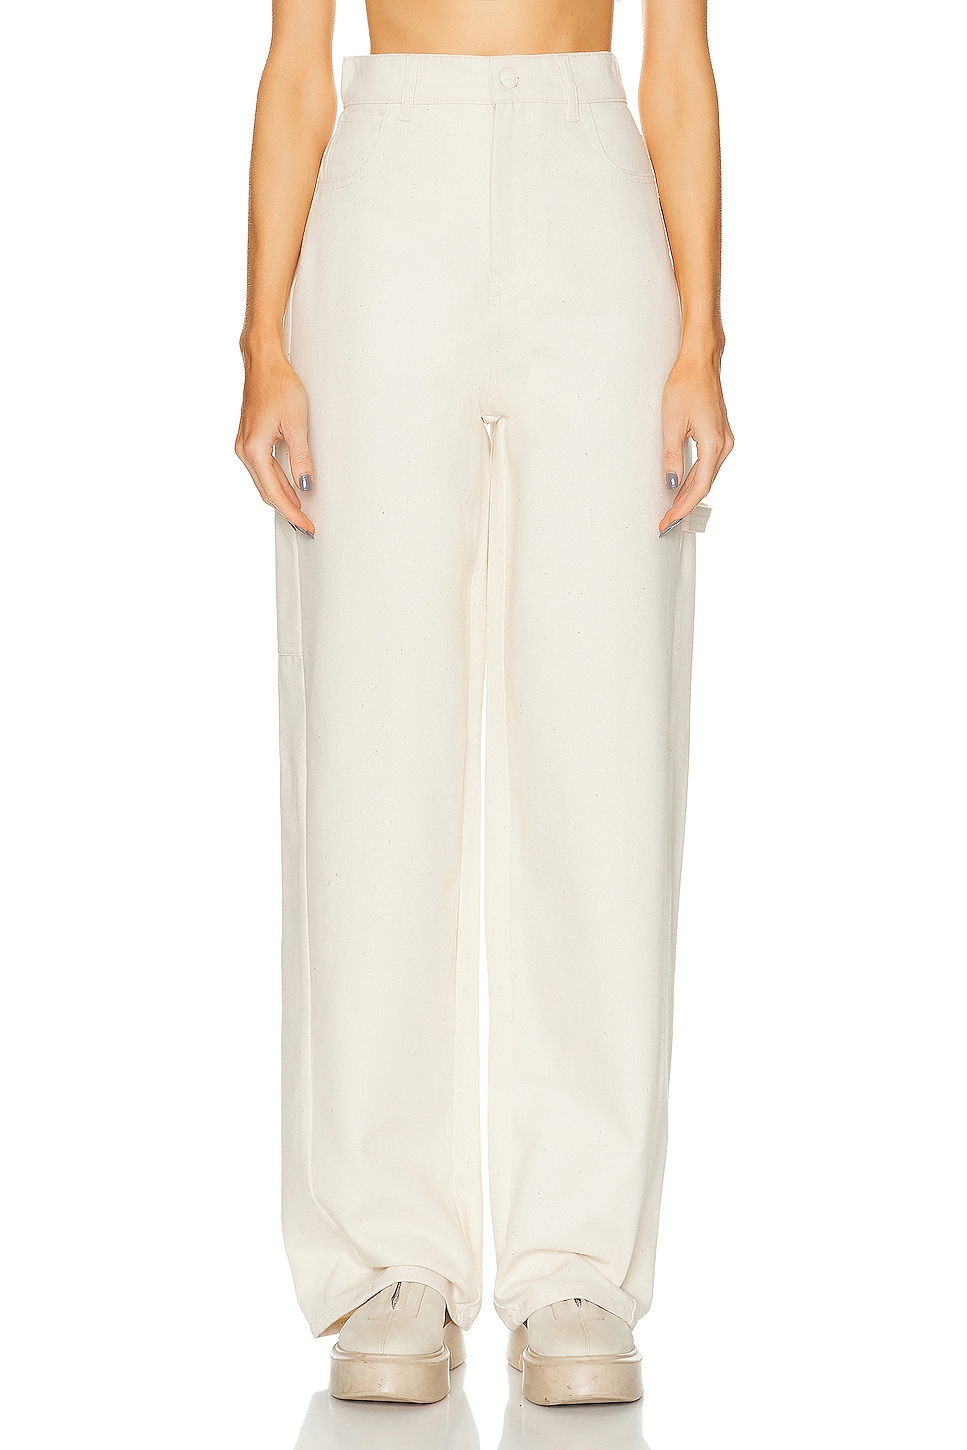 Image 1 of Max Mara Twill Trousers in Ivory